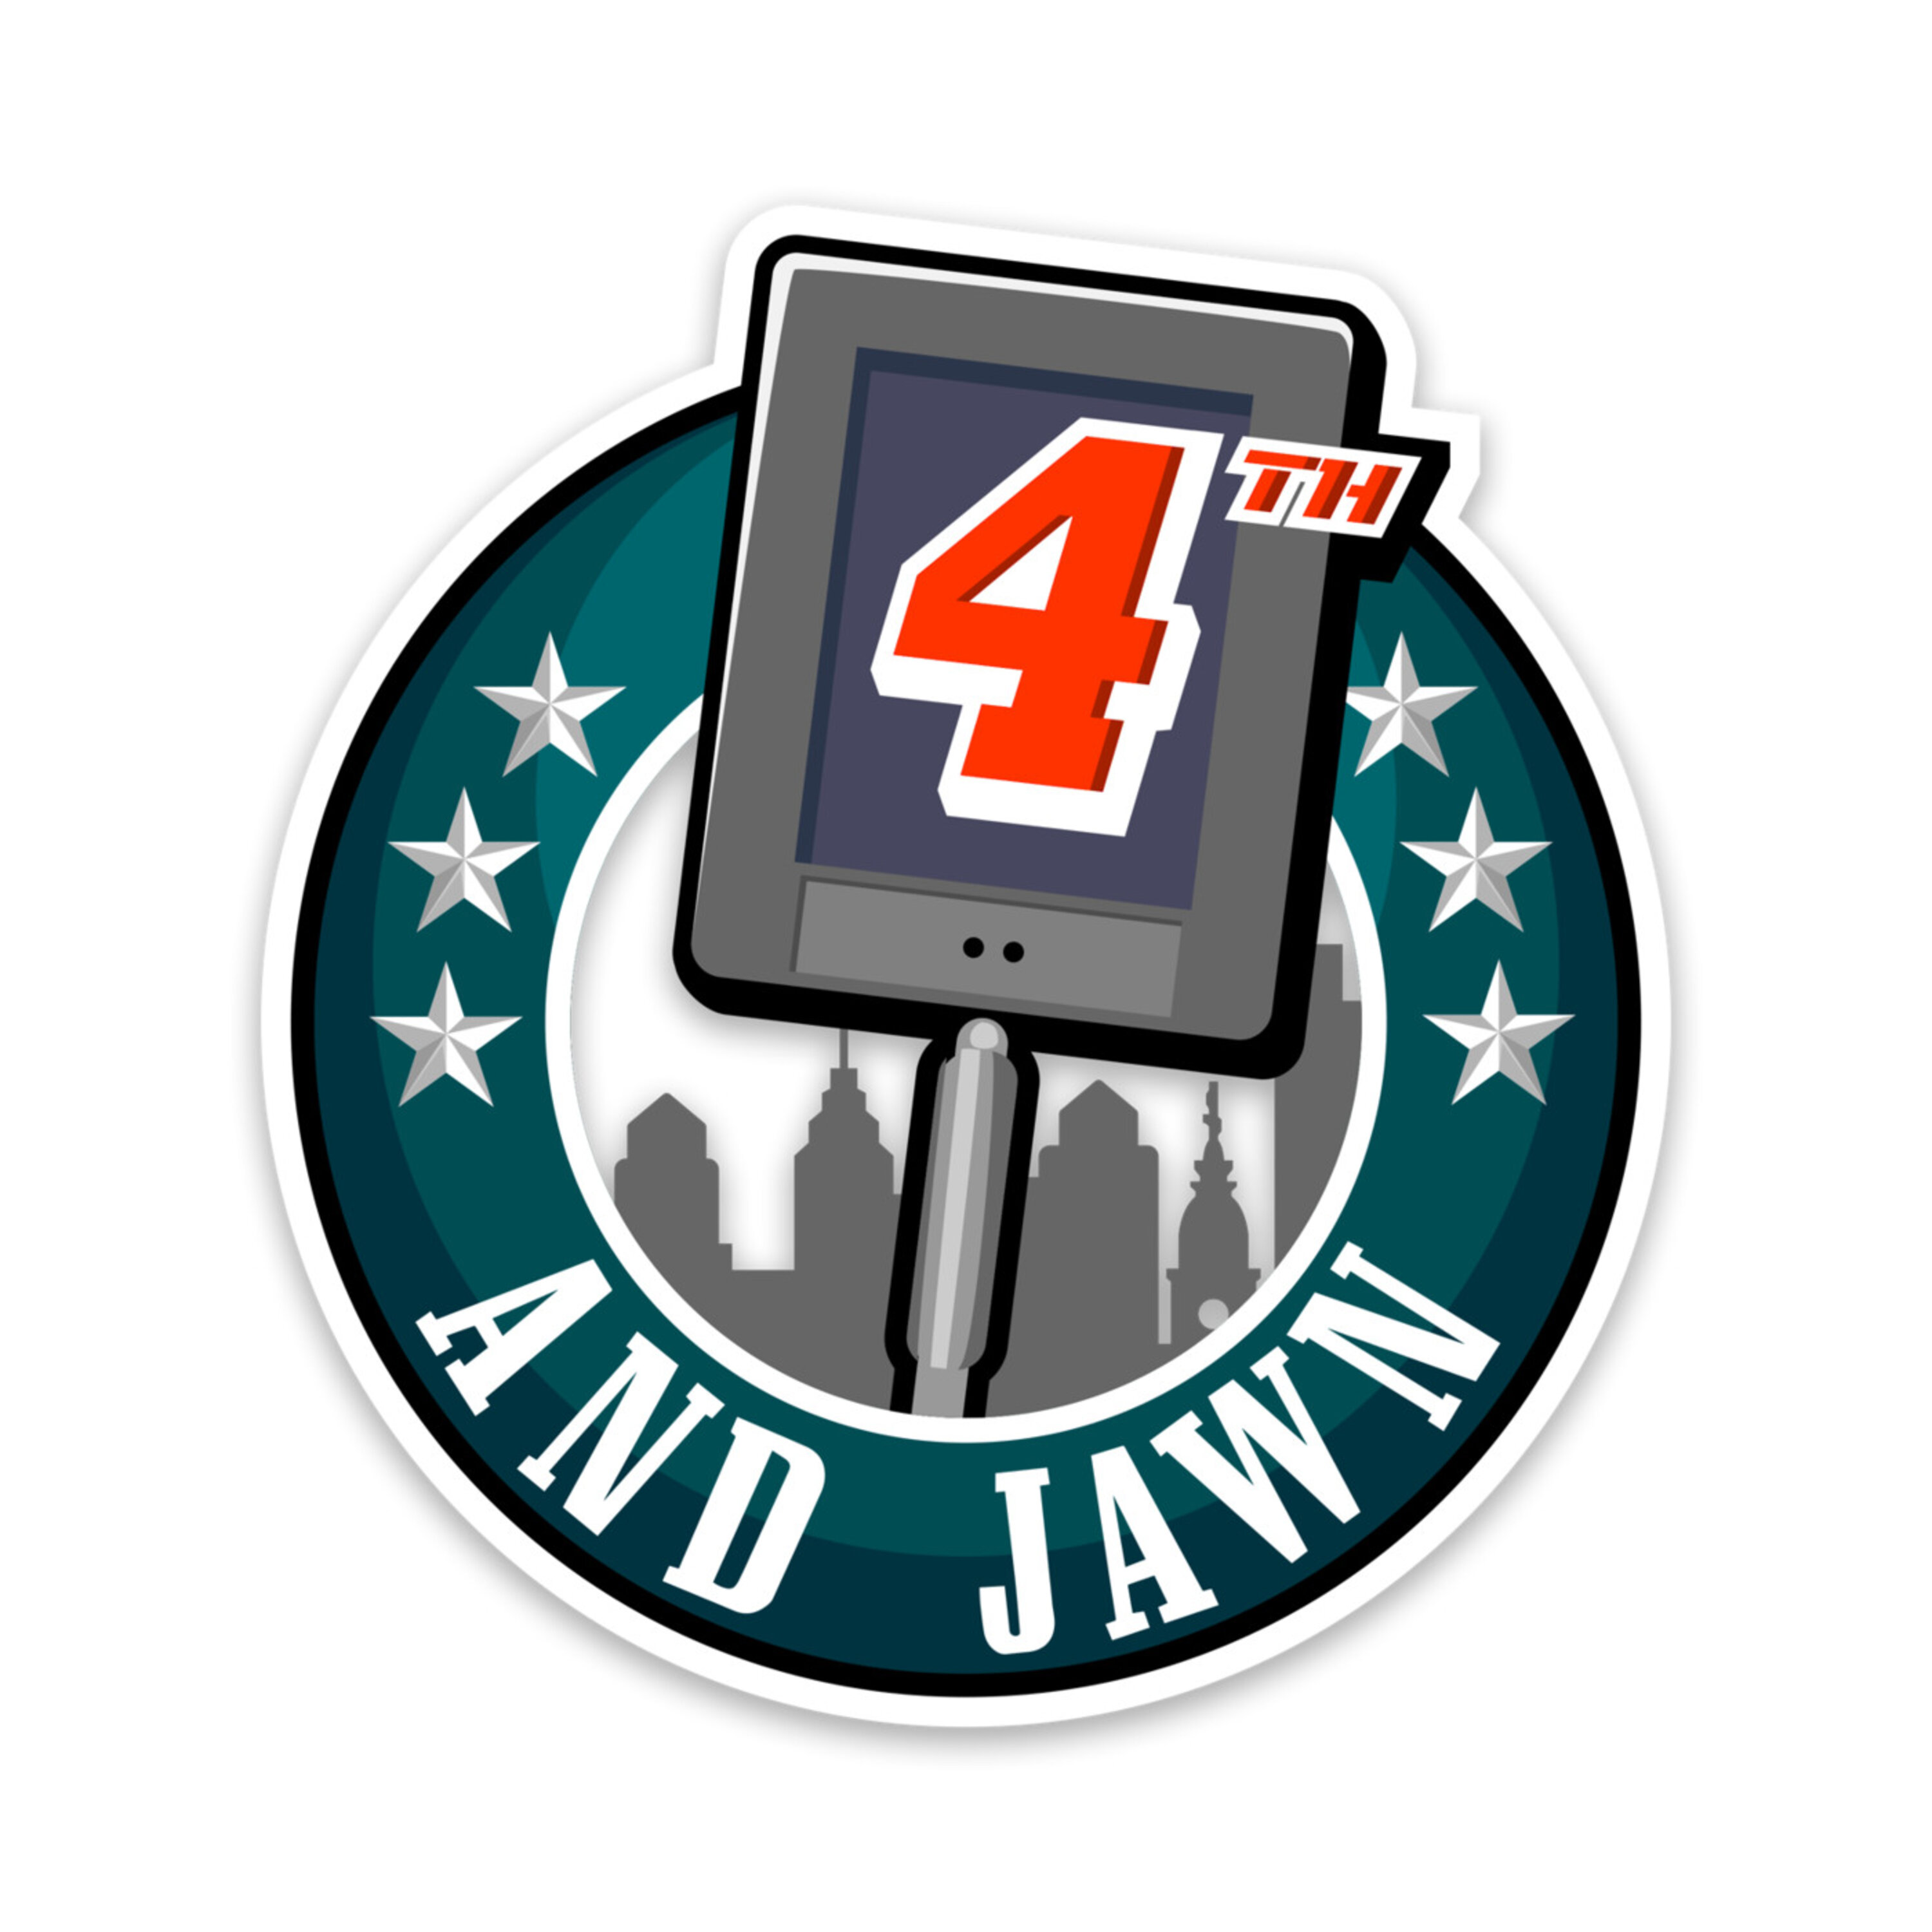 4th and Jawn - Episode 132 (More Bad News...)